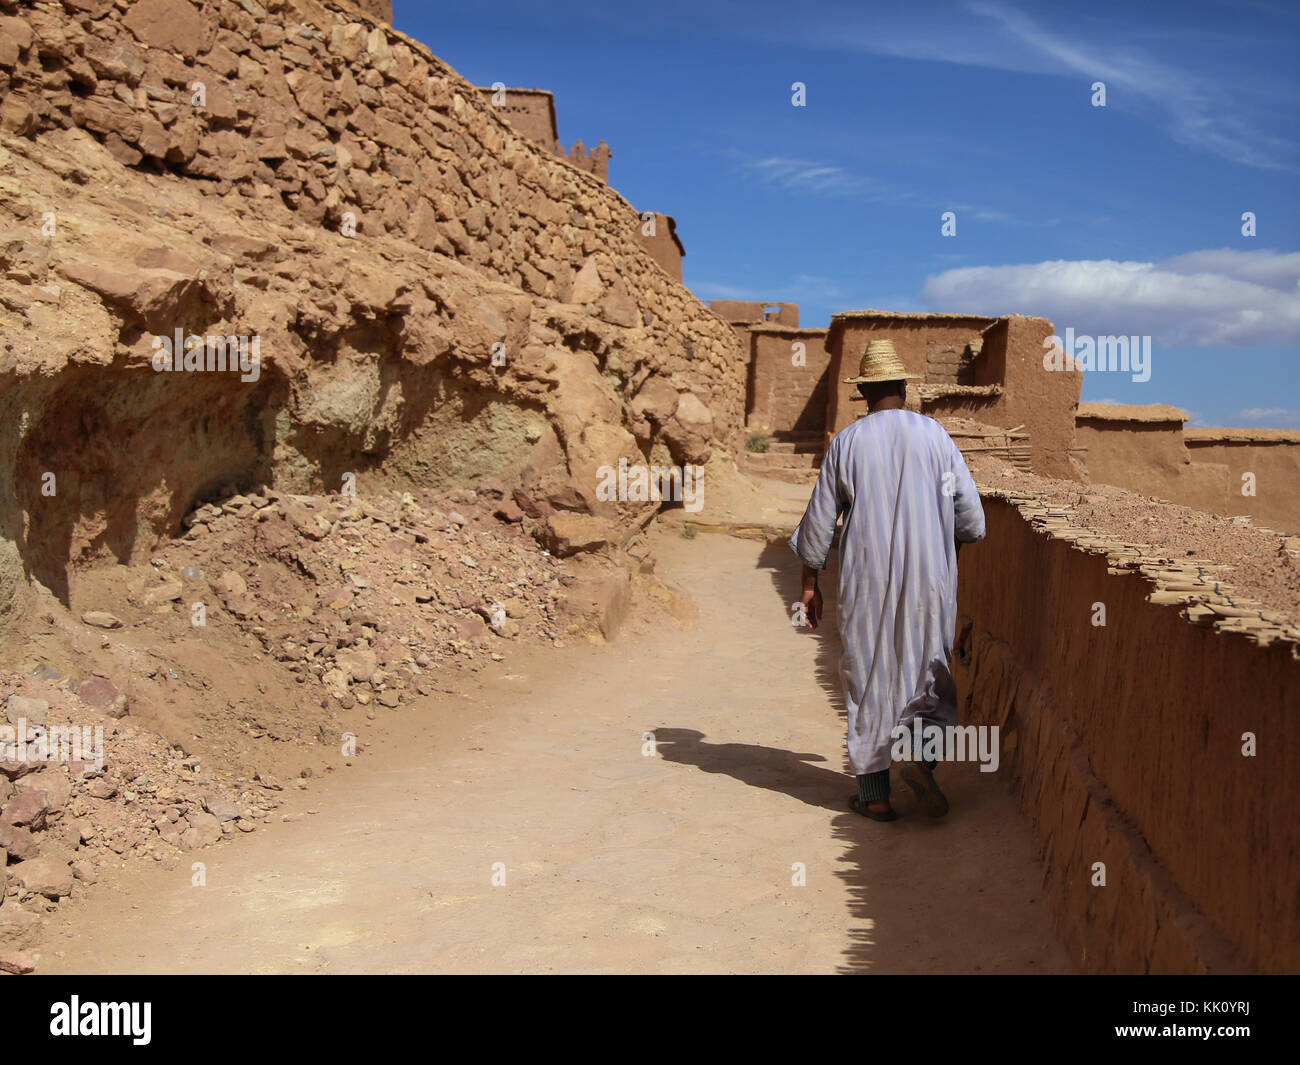 People in Ait Benhaddou in Morocco Stock Photo